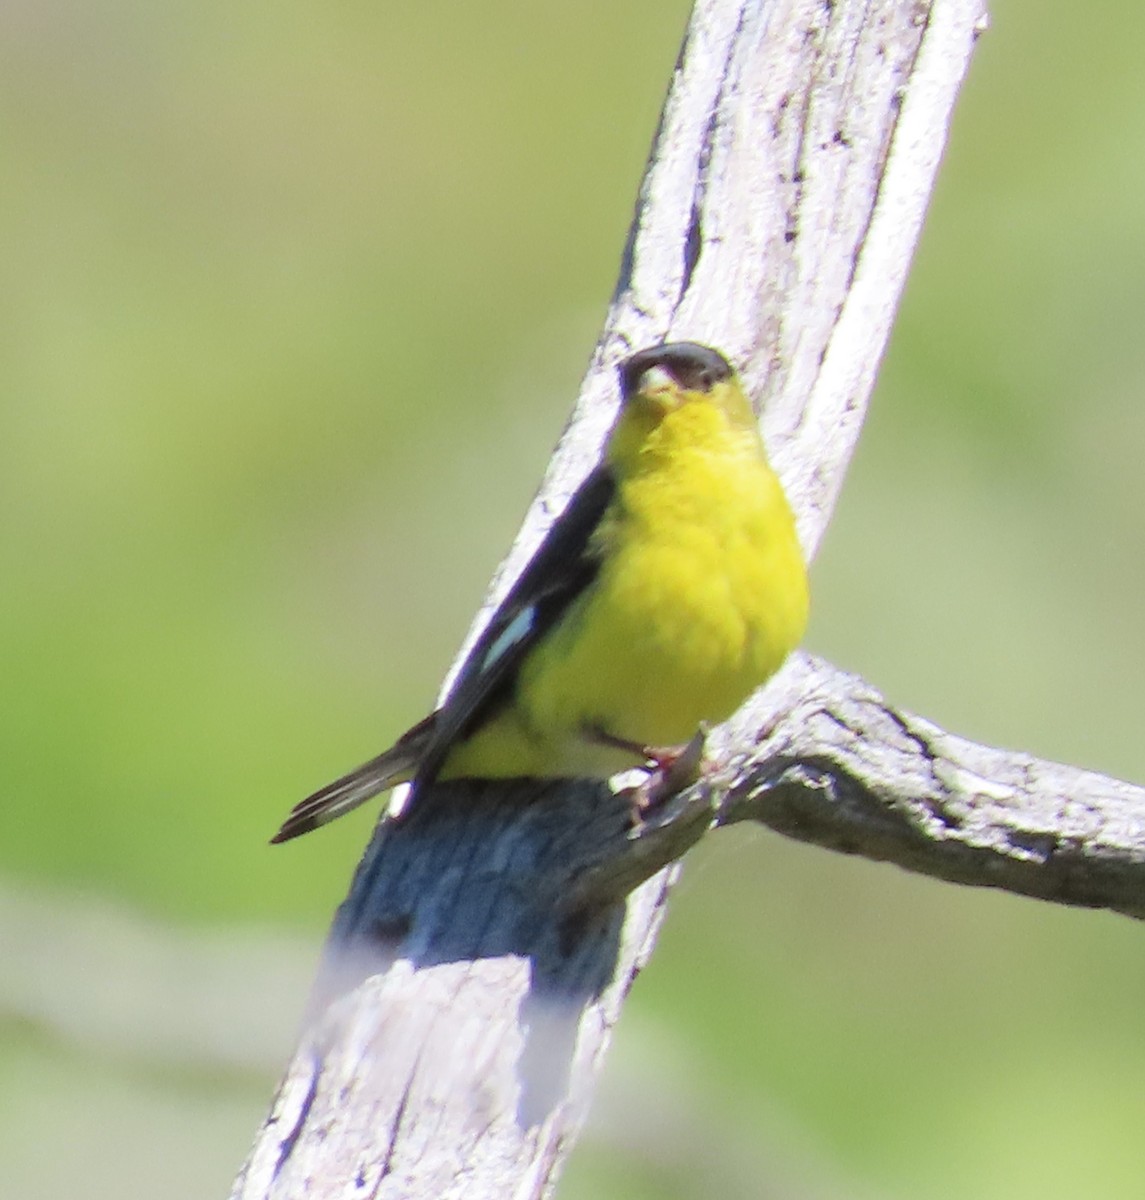 Lesser Goldfinch - The Spotting Twohees